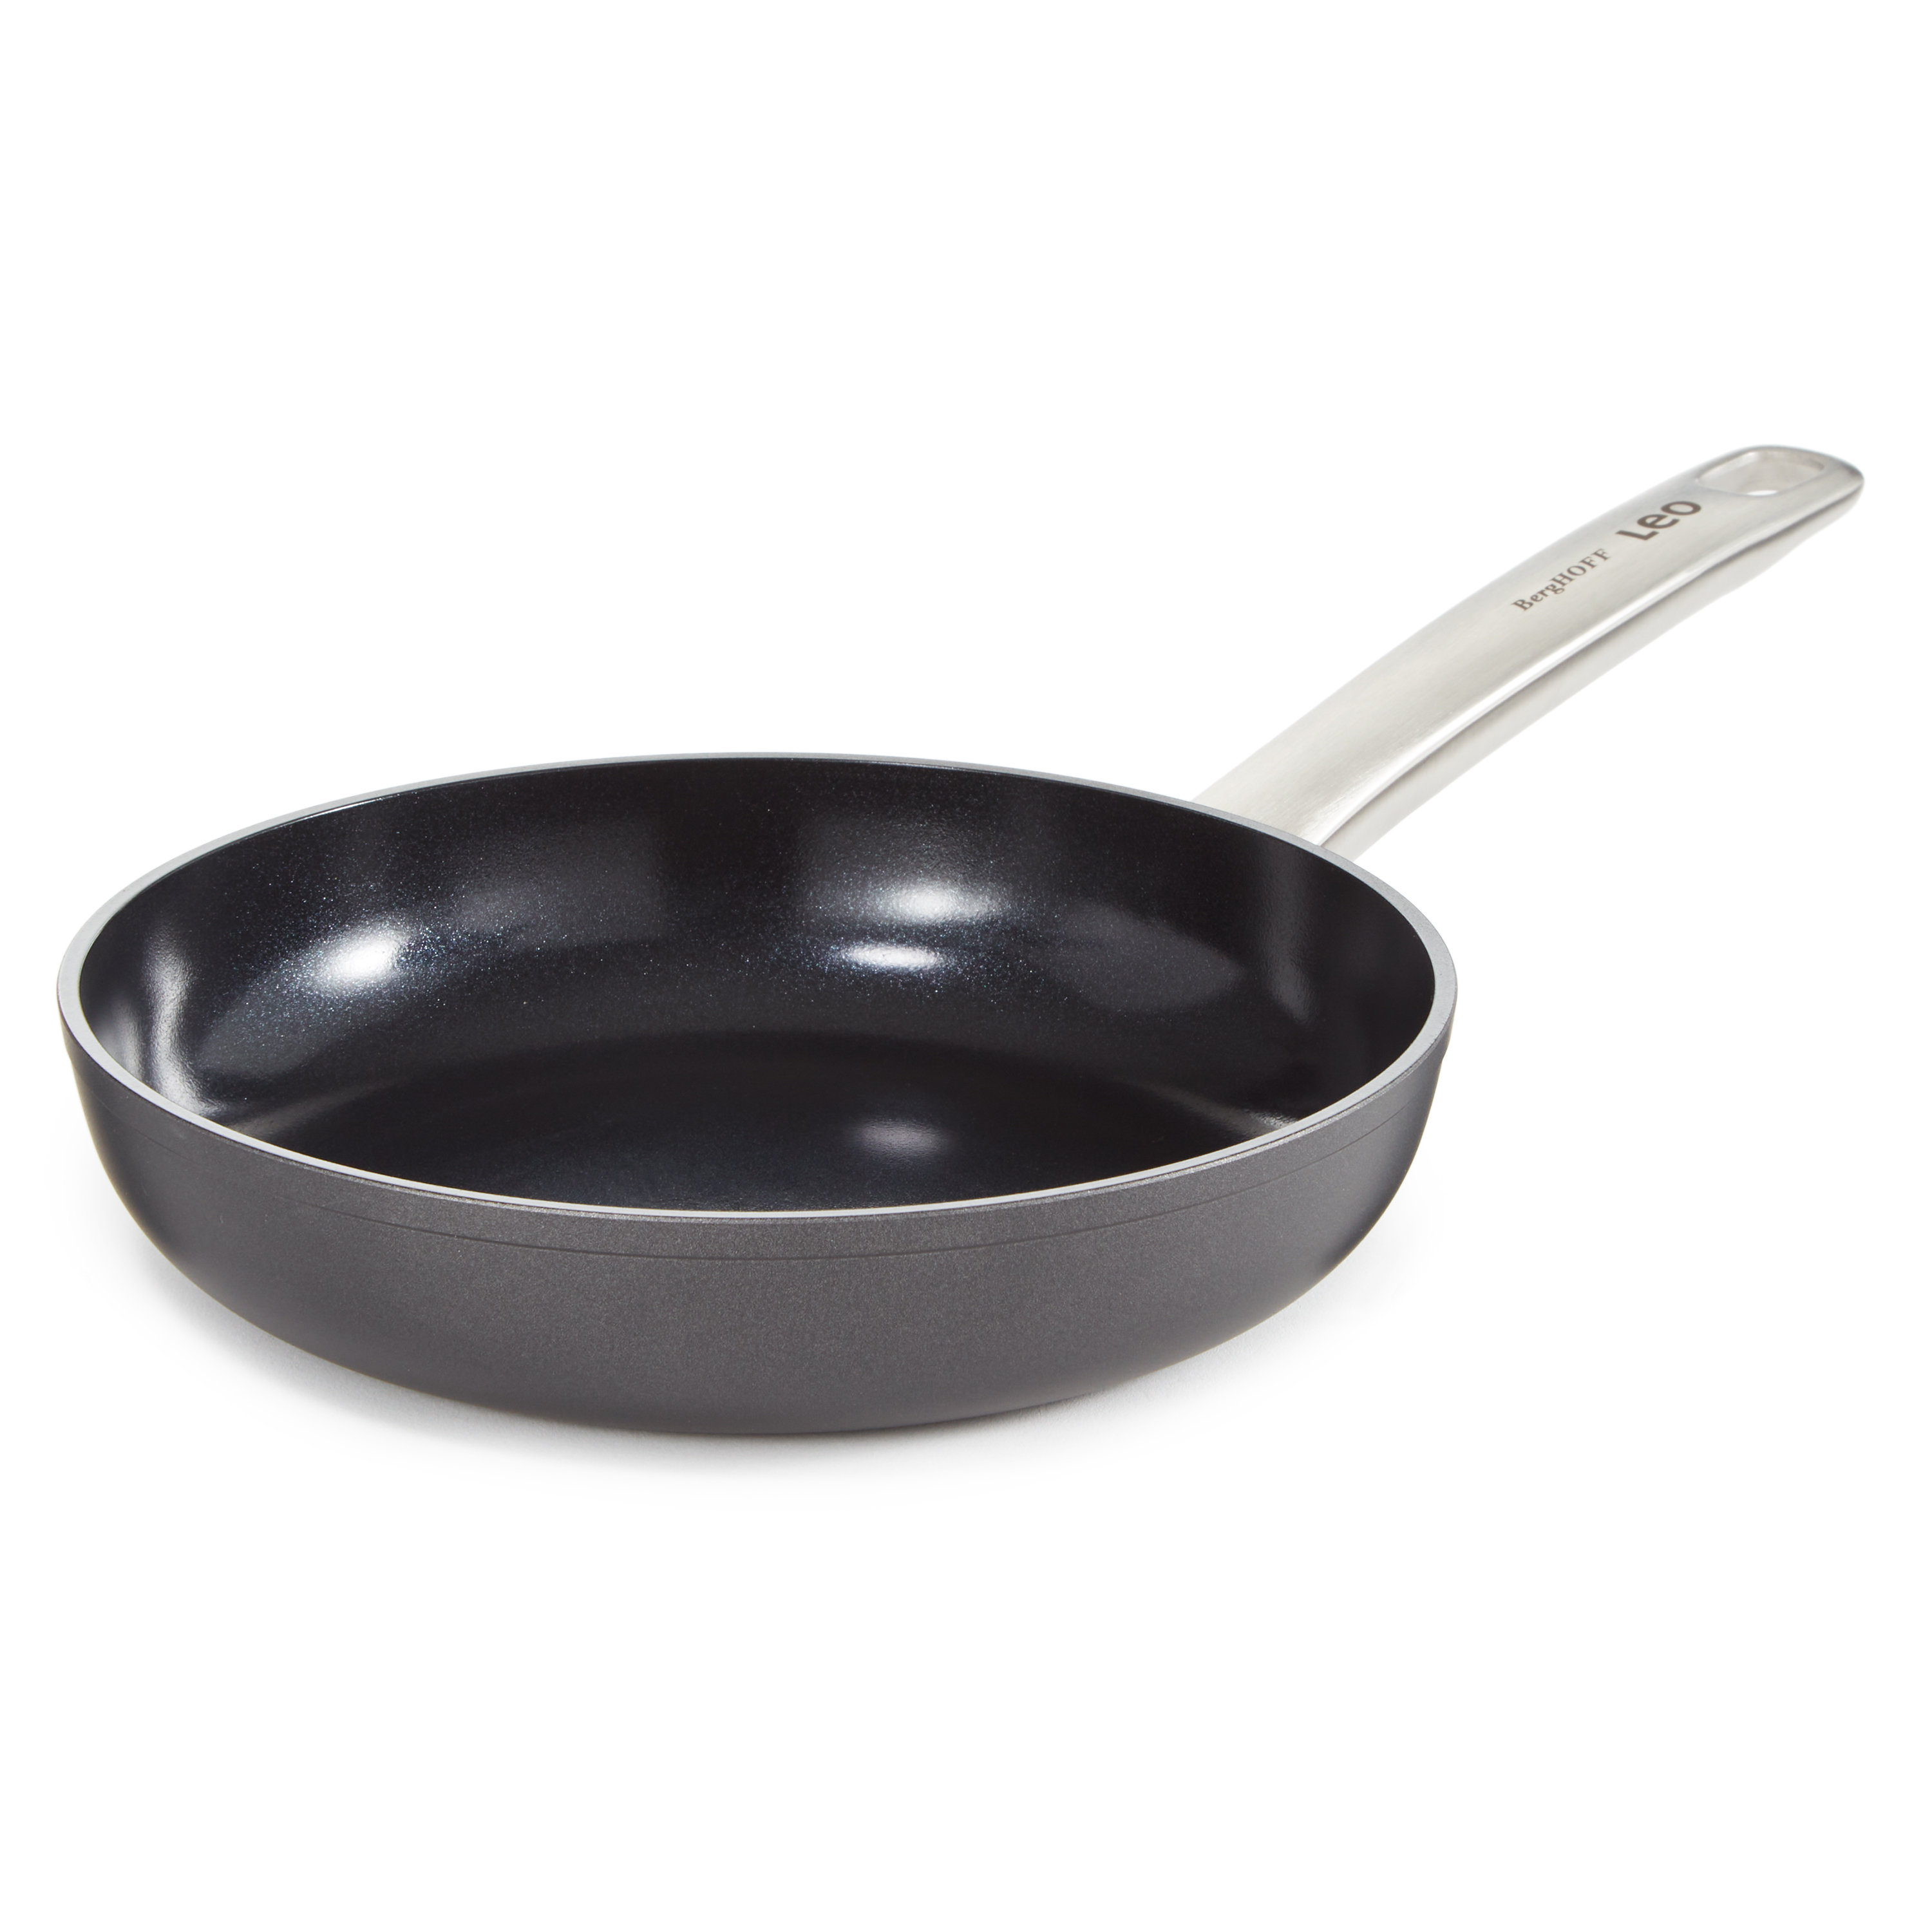  Made In Cookware - 8 Non Stick Frying Pan (Graphite